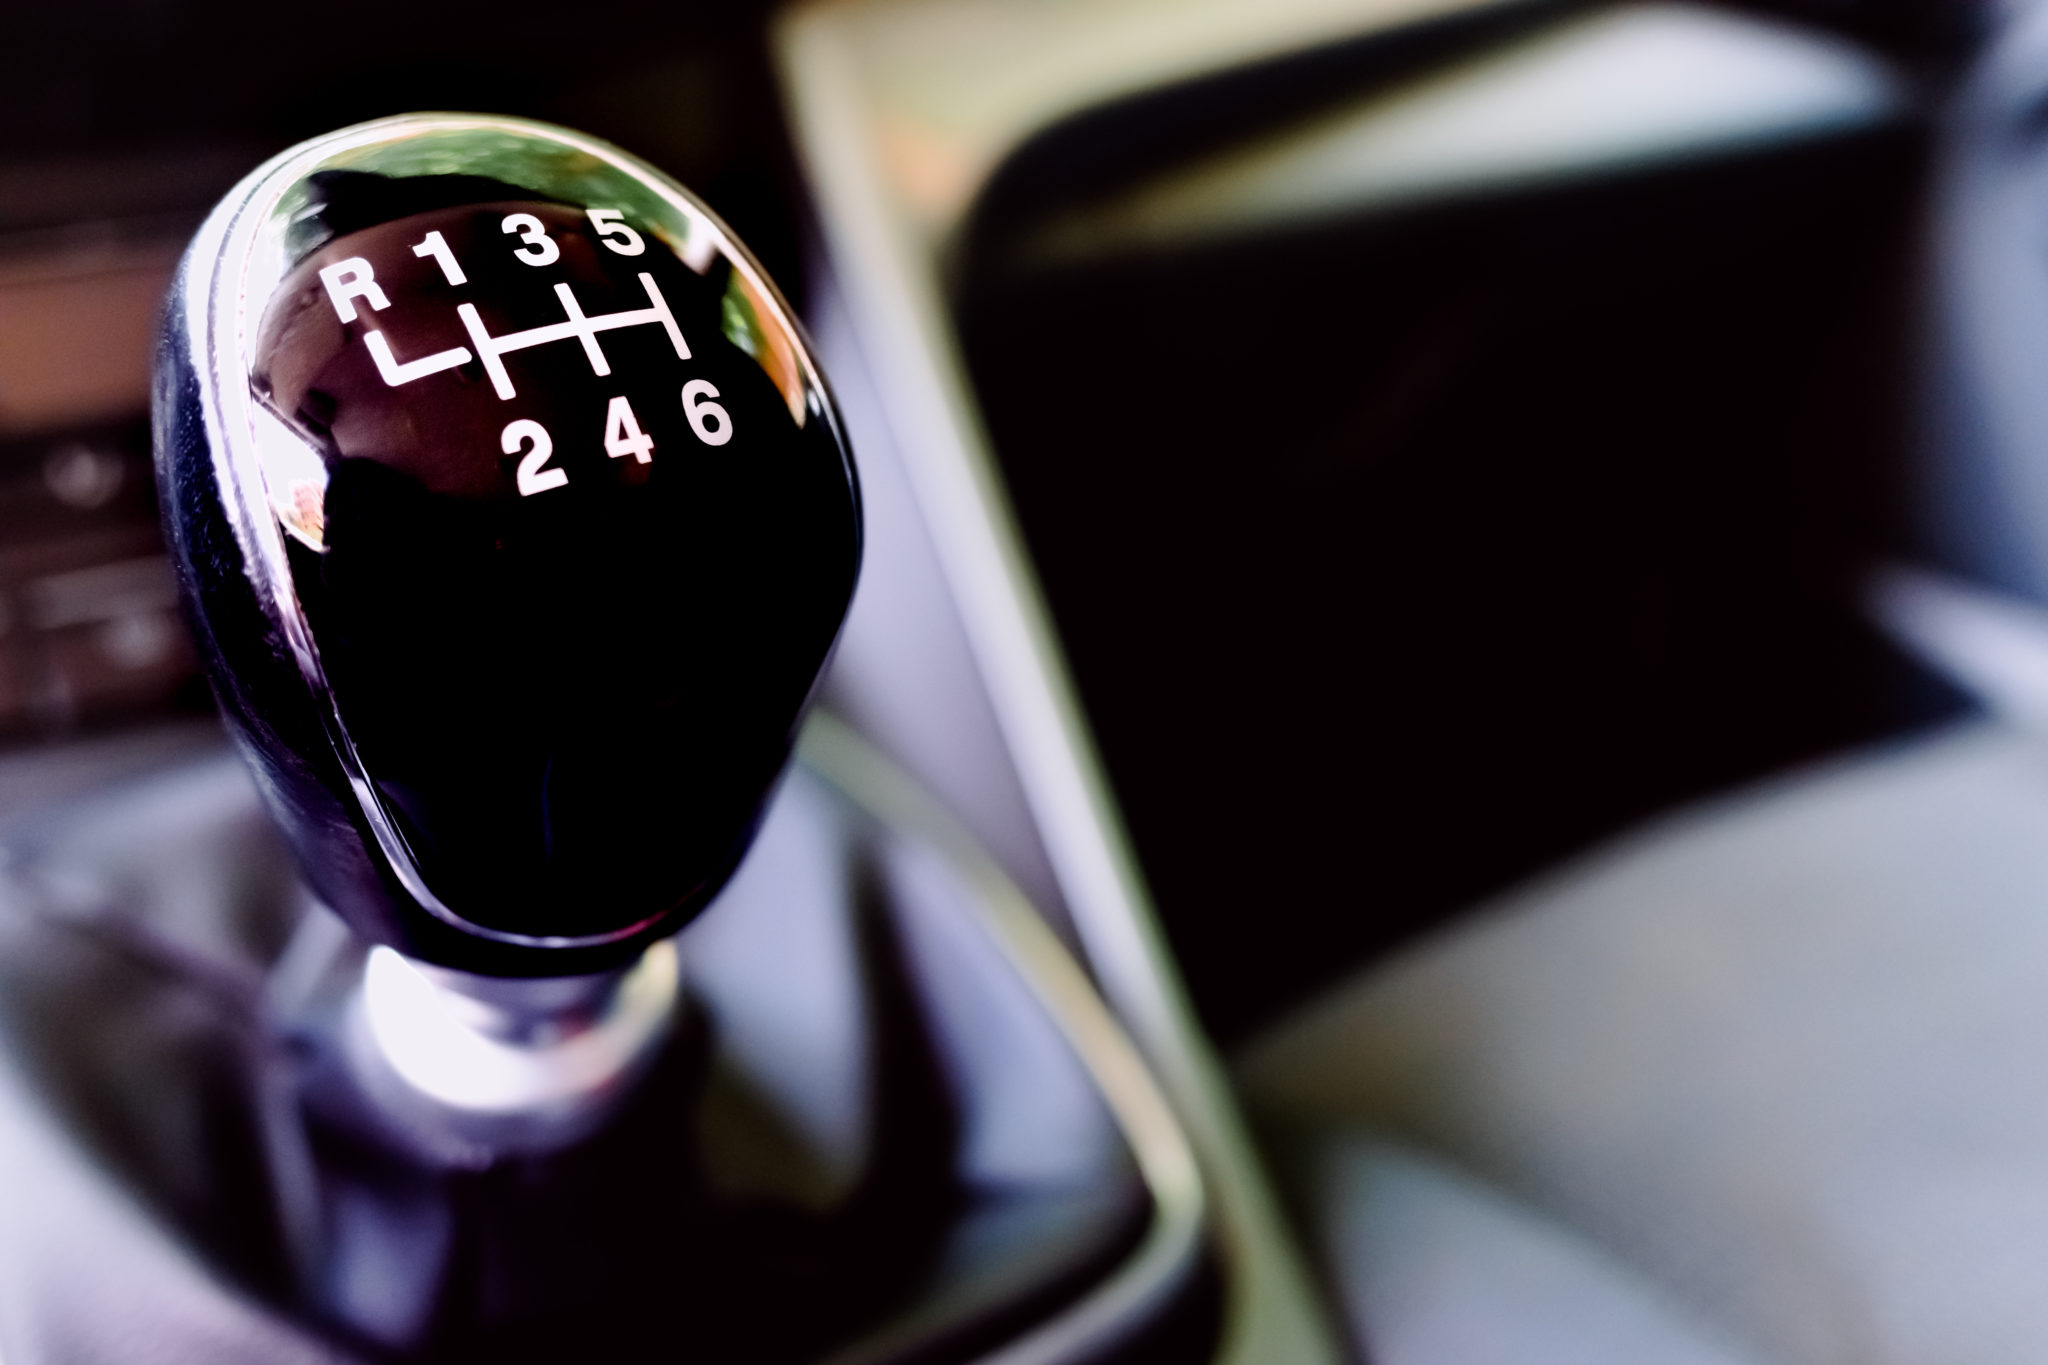 https://autolab.com.co/wp-content/uploads/2022/11/knob-on-the-gear-shift-lever-of-a-european-car-2022-05-03-12-15-13-utc-scaled.jpg